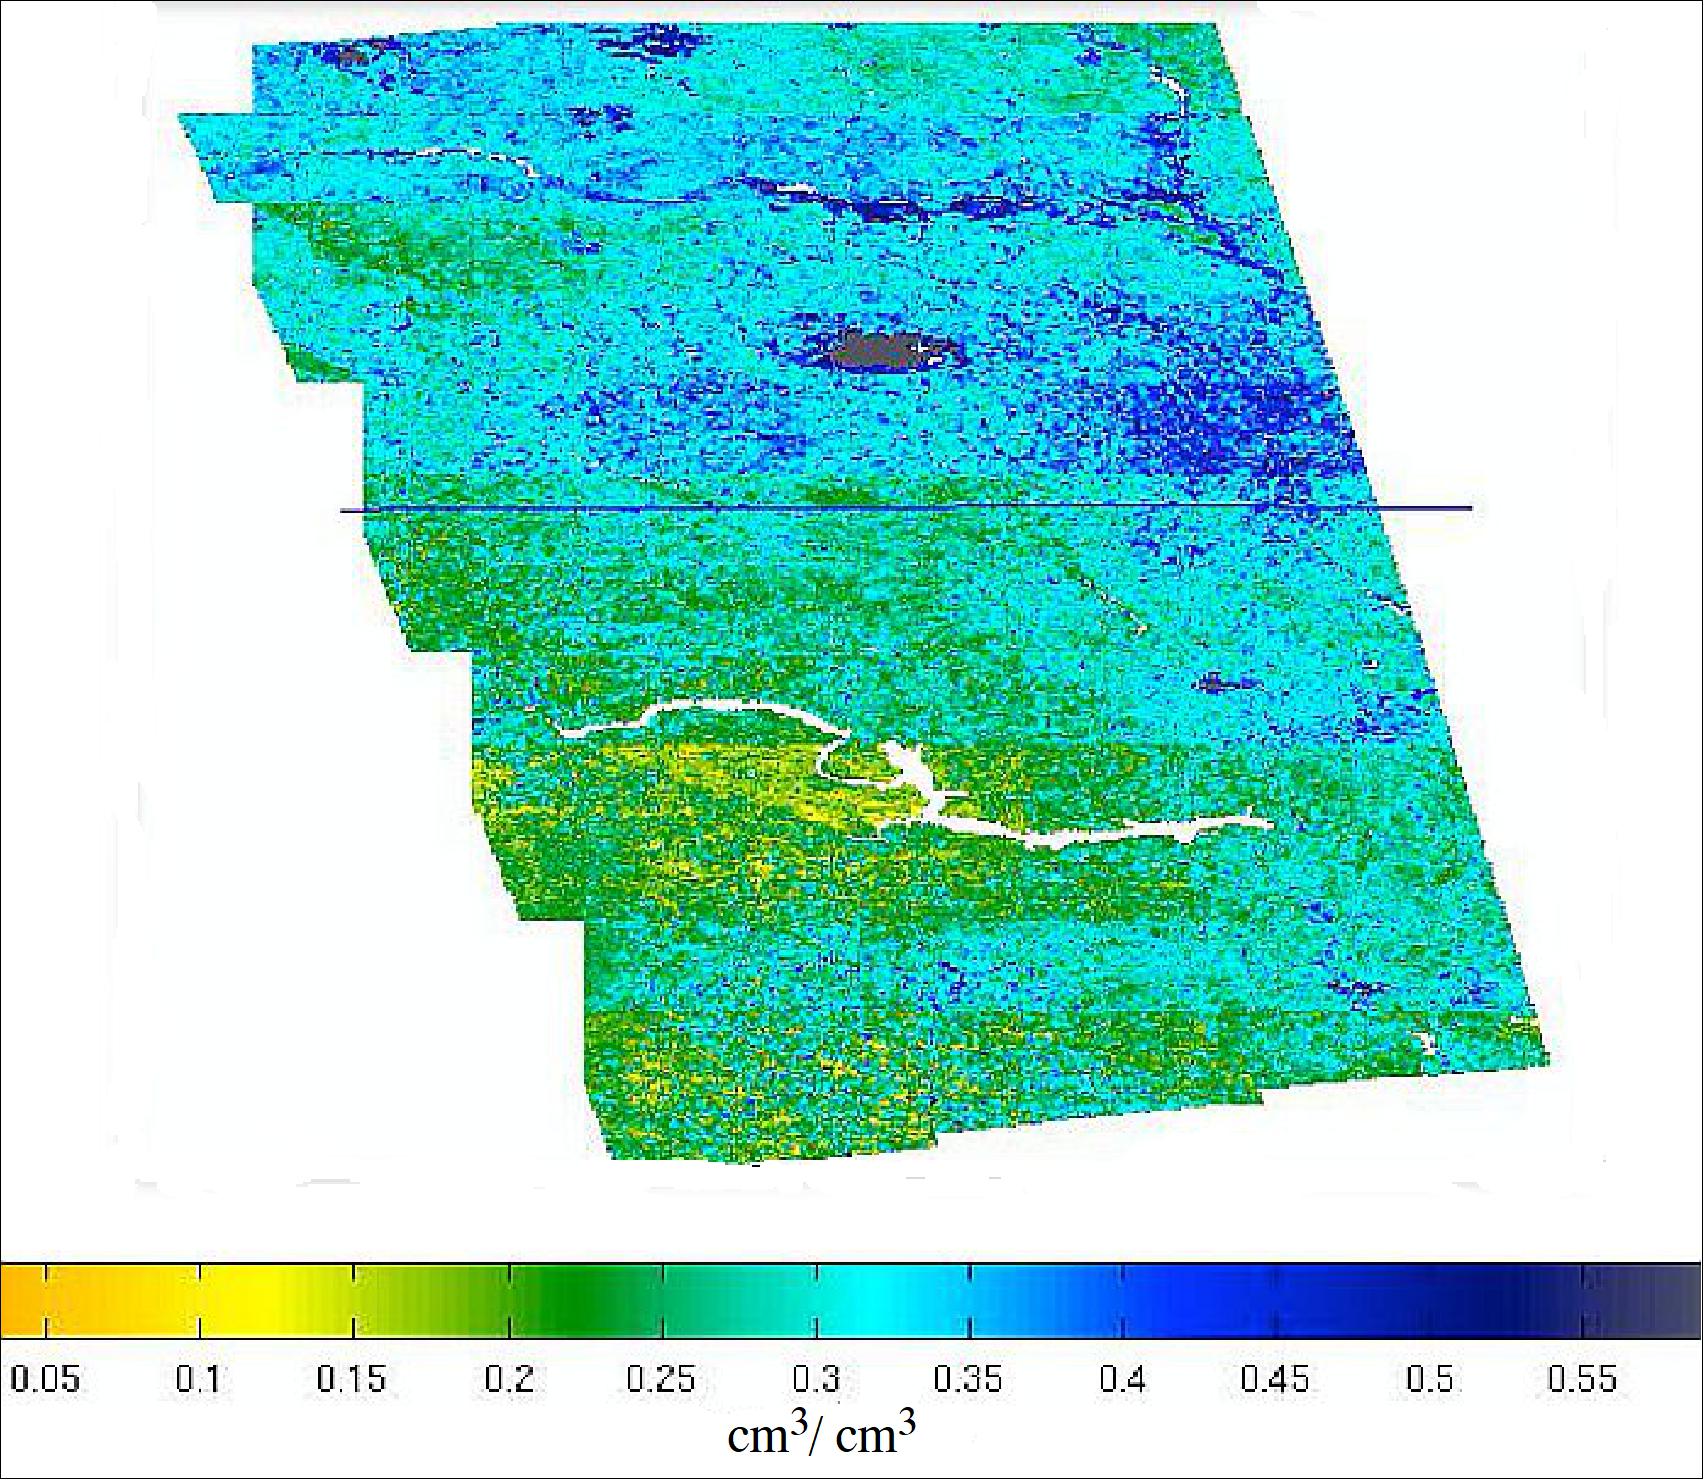 Figure 30: High resolution (1 km) soil moisture derived from combined SMAP radiometer and Sentinel-1 radar data in southern Canada (image credit: NASA/JPL)